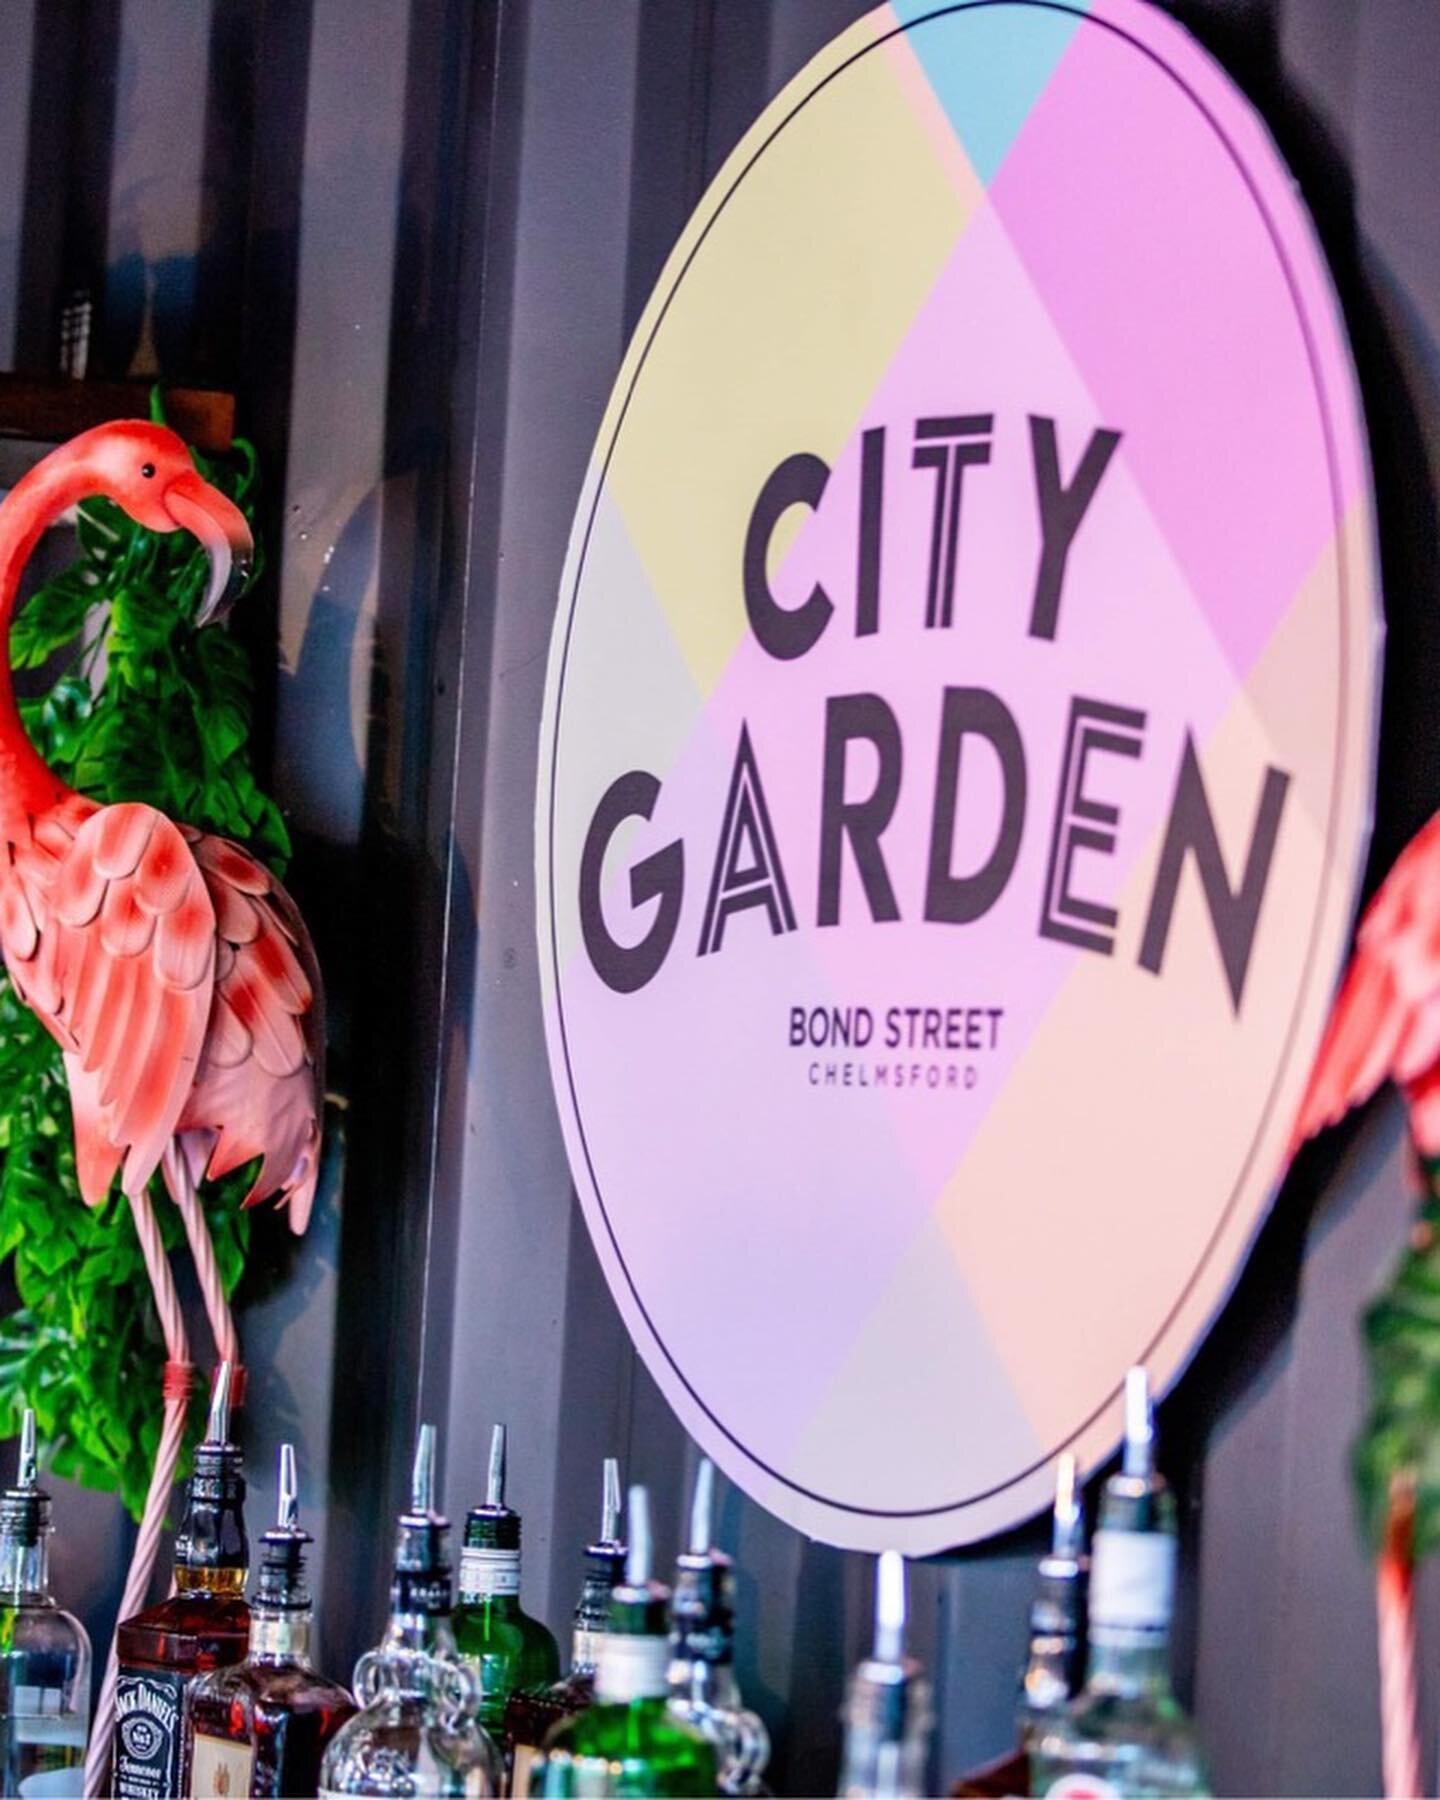 @citygardenchelmsford is one of our pop-up summer bars with @bondstreetchelmsford 

If you you haven&rsquo;t had a chance to check us out, make sure you come and see us by the end of the summer! We still have lots of entertainment and street-food com